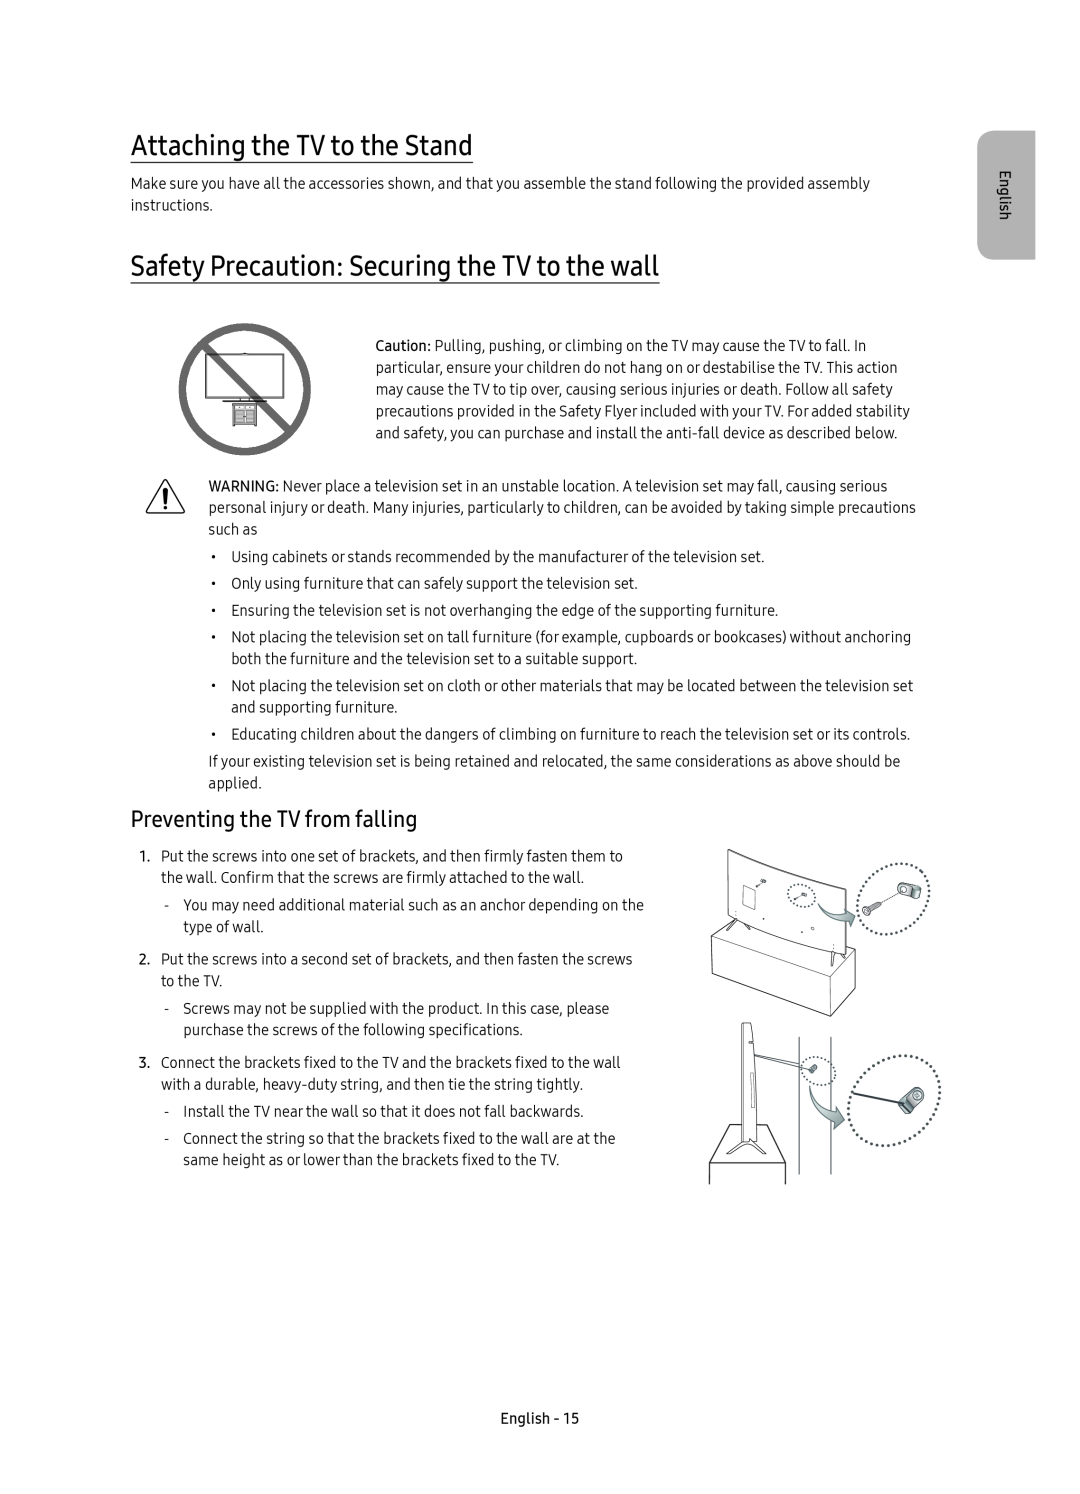 Samsung UE55KU6510UXZT manual Attaching the TV to the Stand, Safety Precaution Securing the TV to the wall, English 